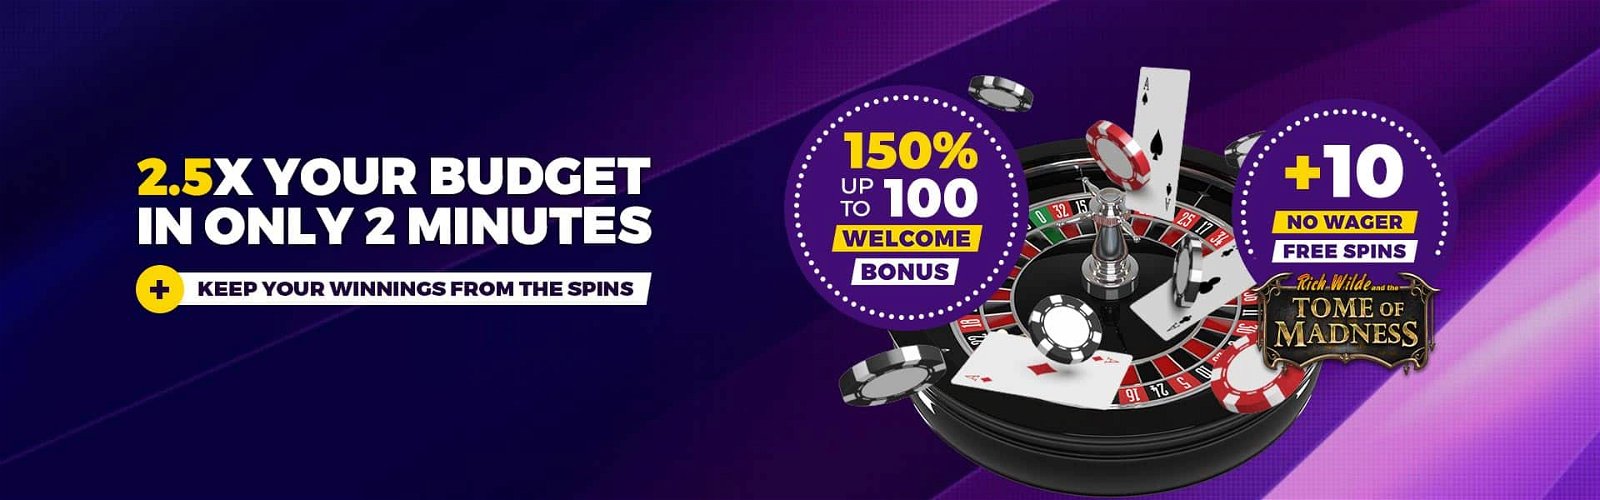 Casino | Welcome Offer | Table Games